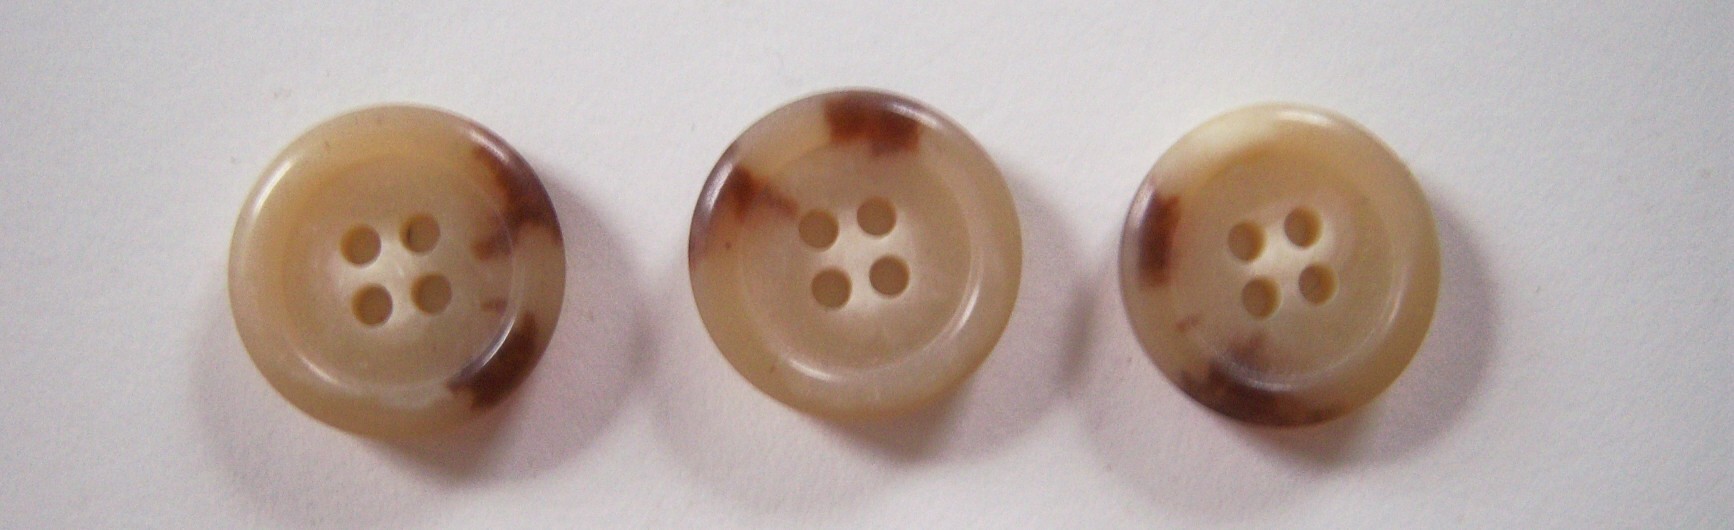 Tan/Brown Marbled 5/8" Button